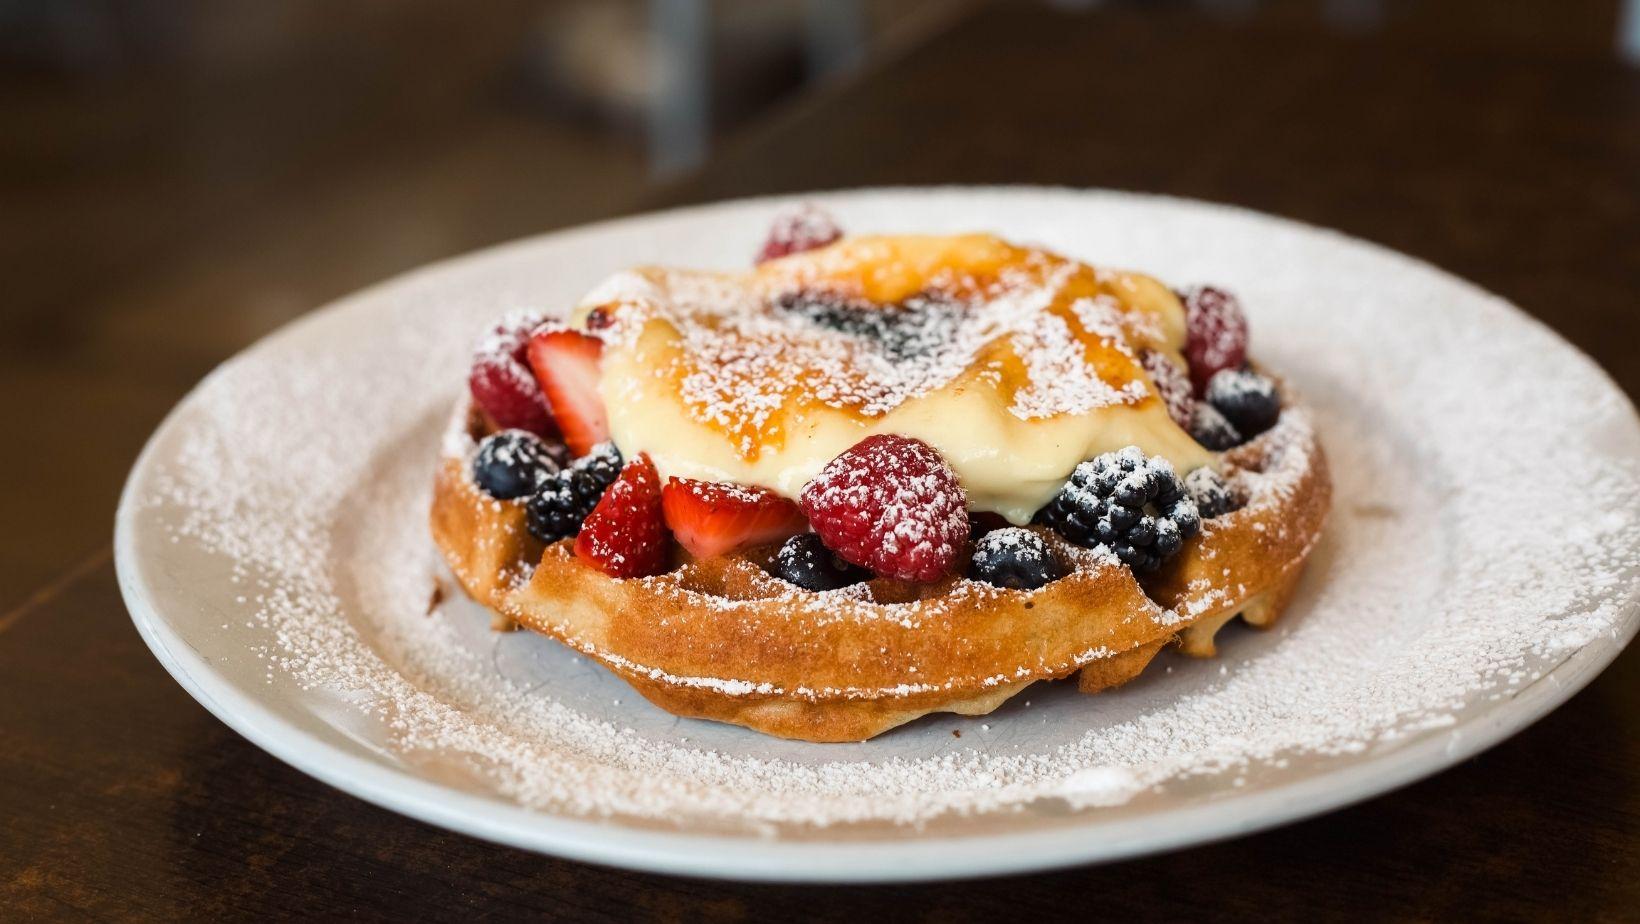 A waffle with berries and creme brulee and powdered sugar on top for brunch.
